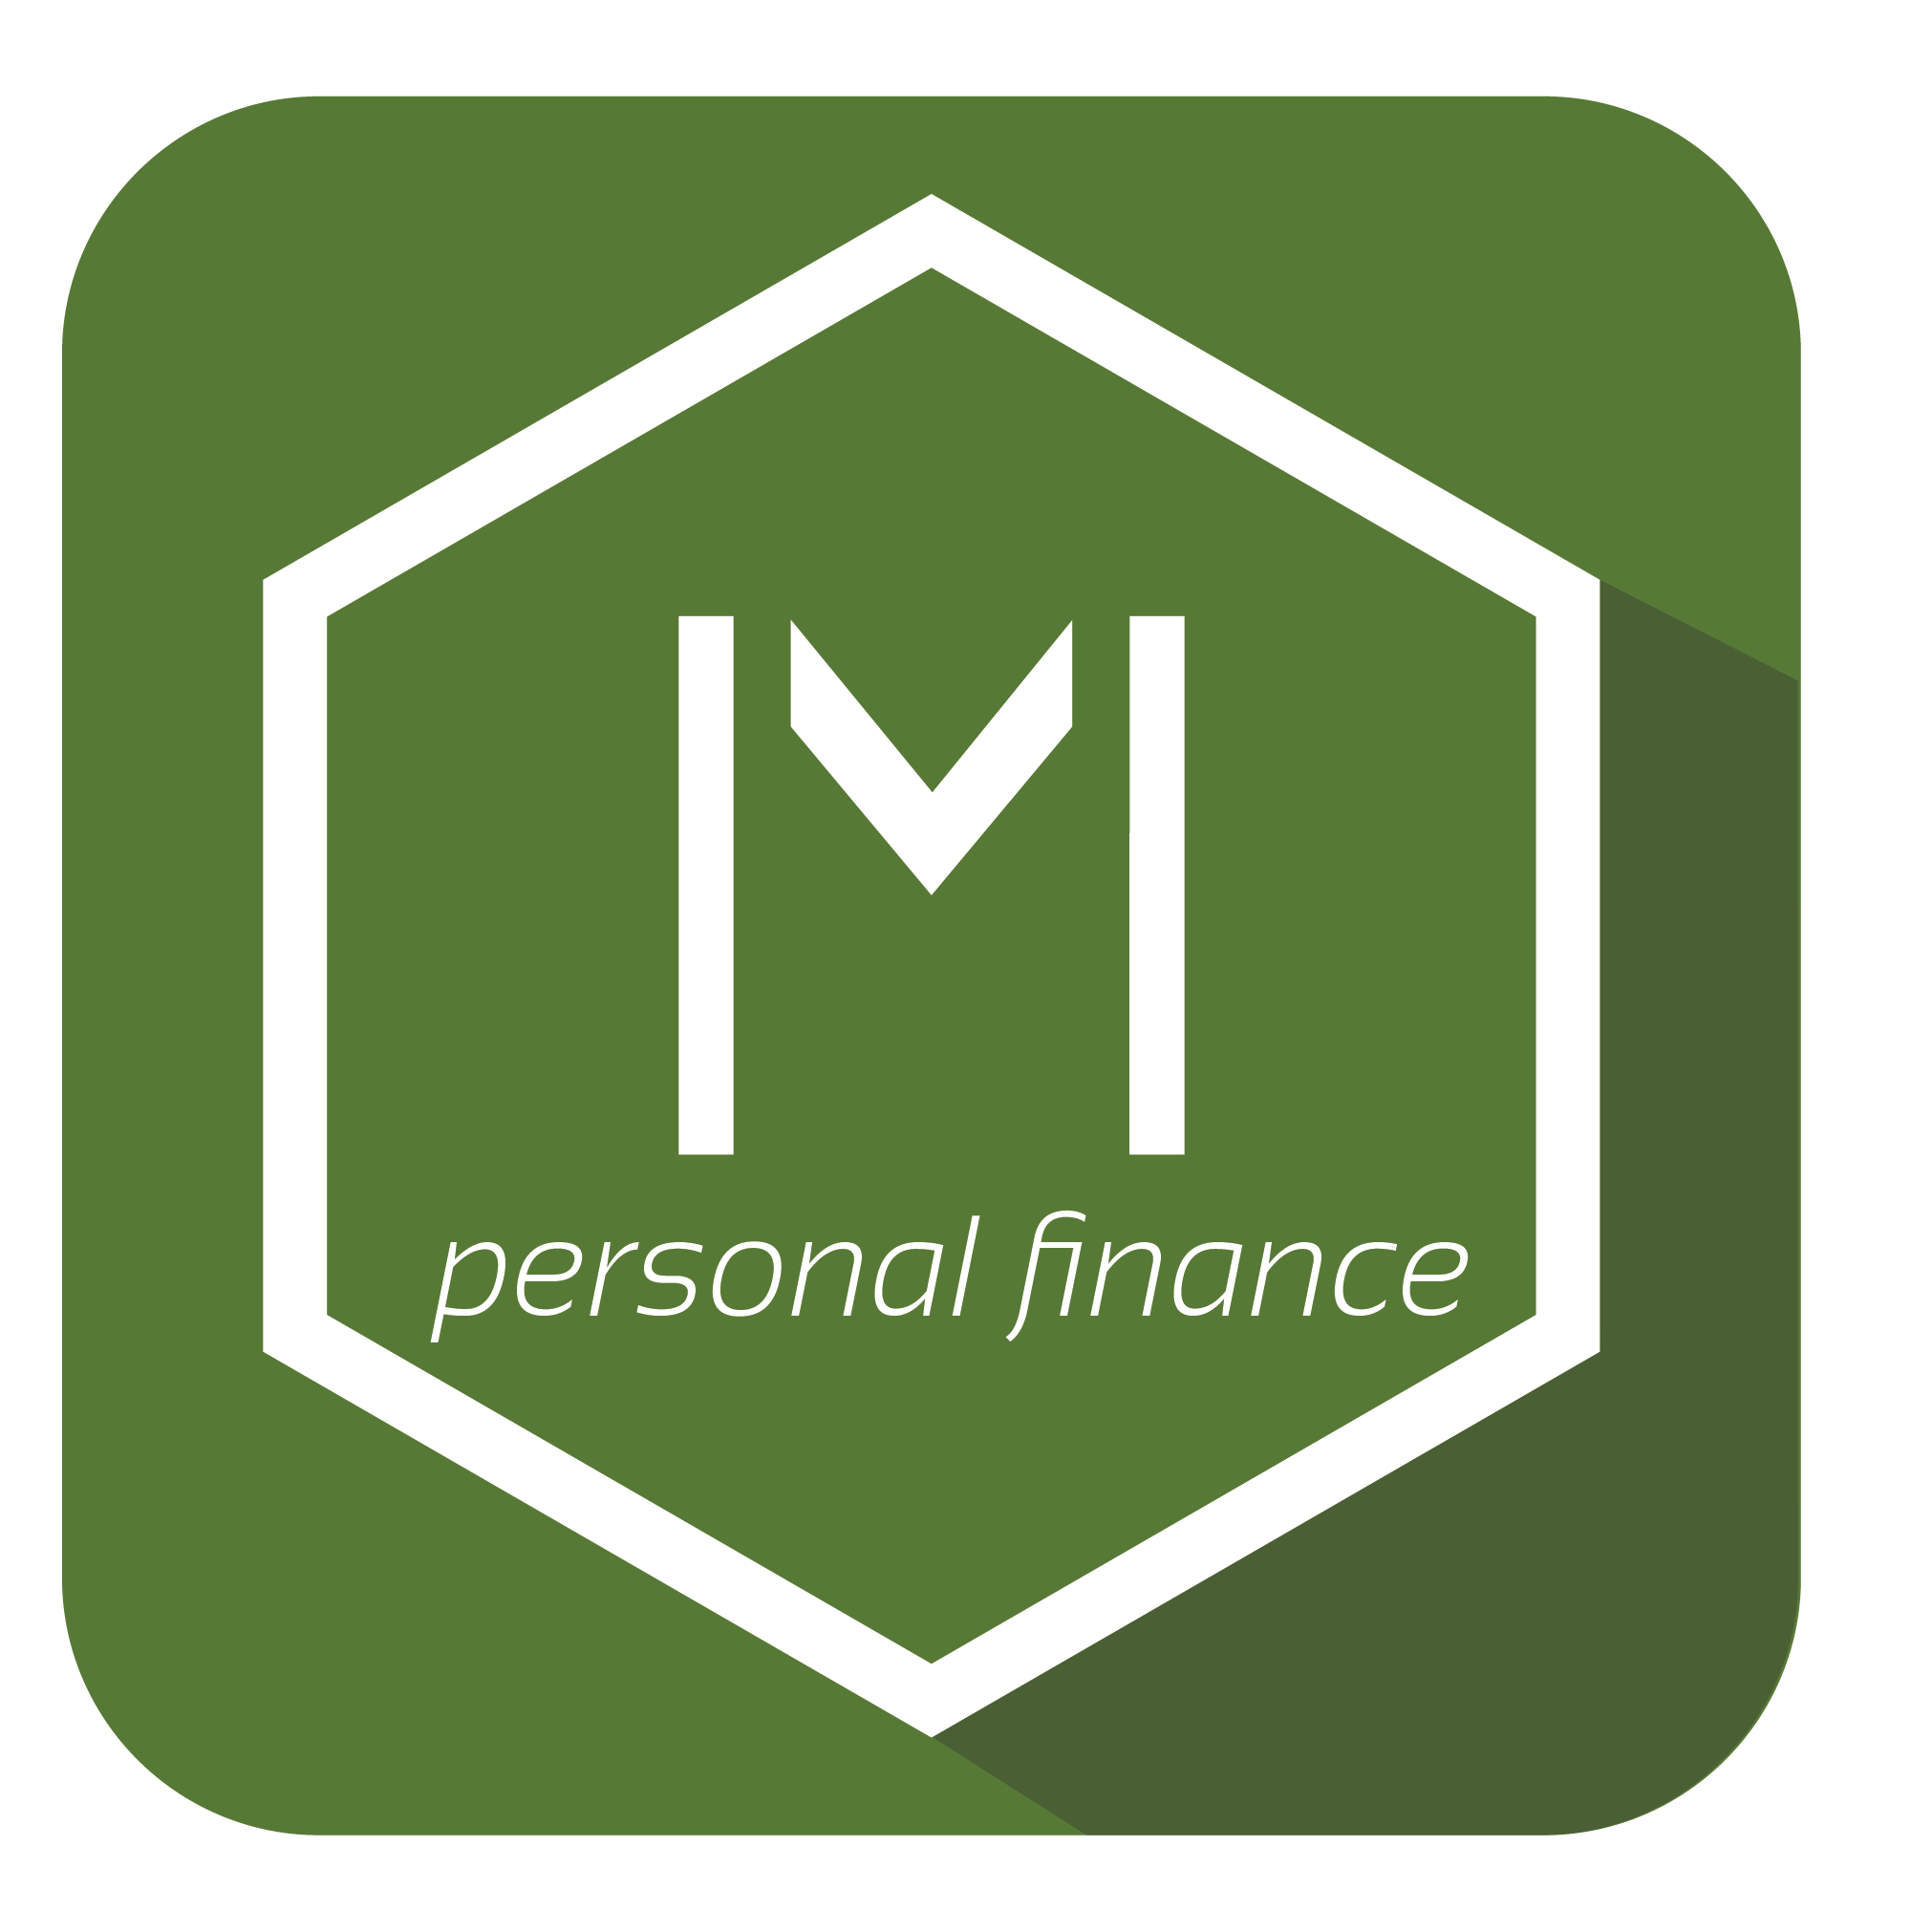 Mimic Personal Finance is first simulation of its kind to connect simulated decision-making with real results.